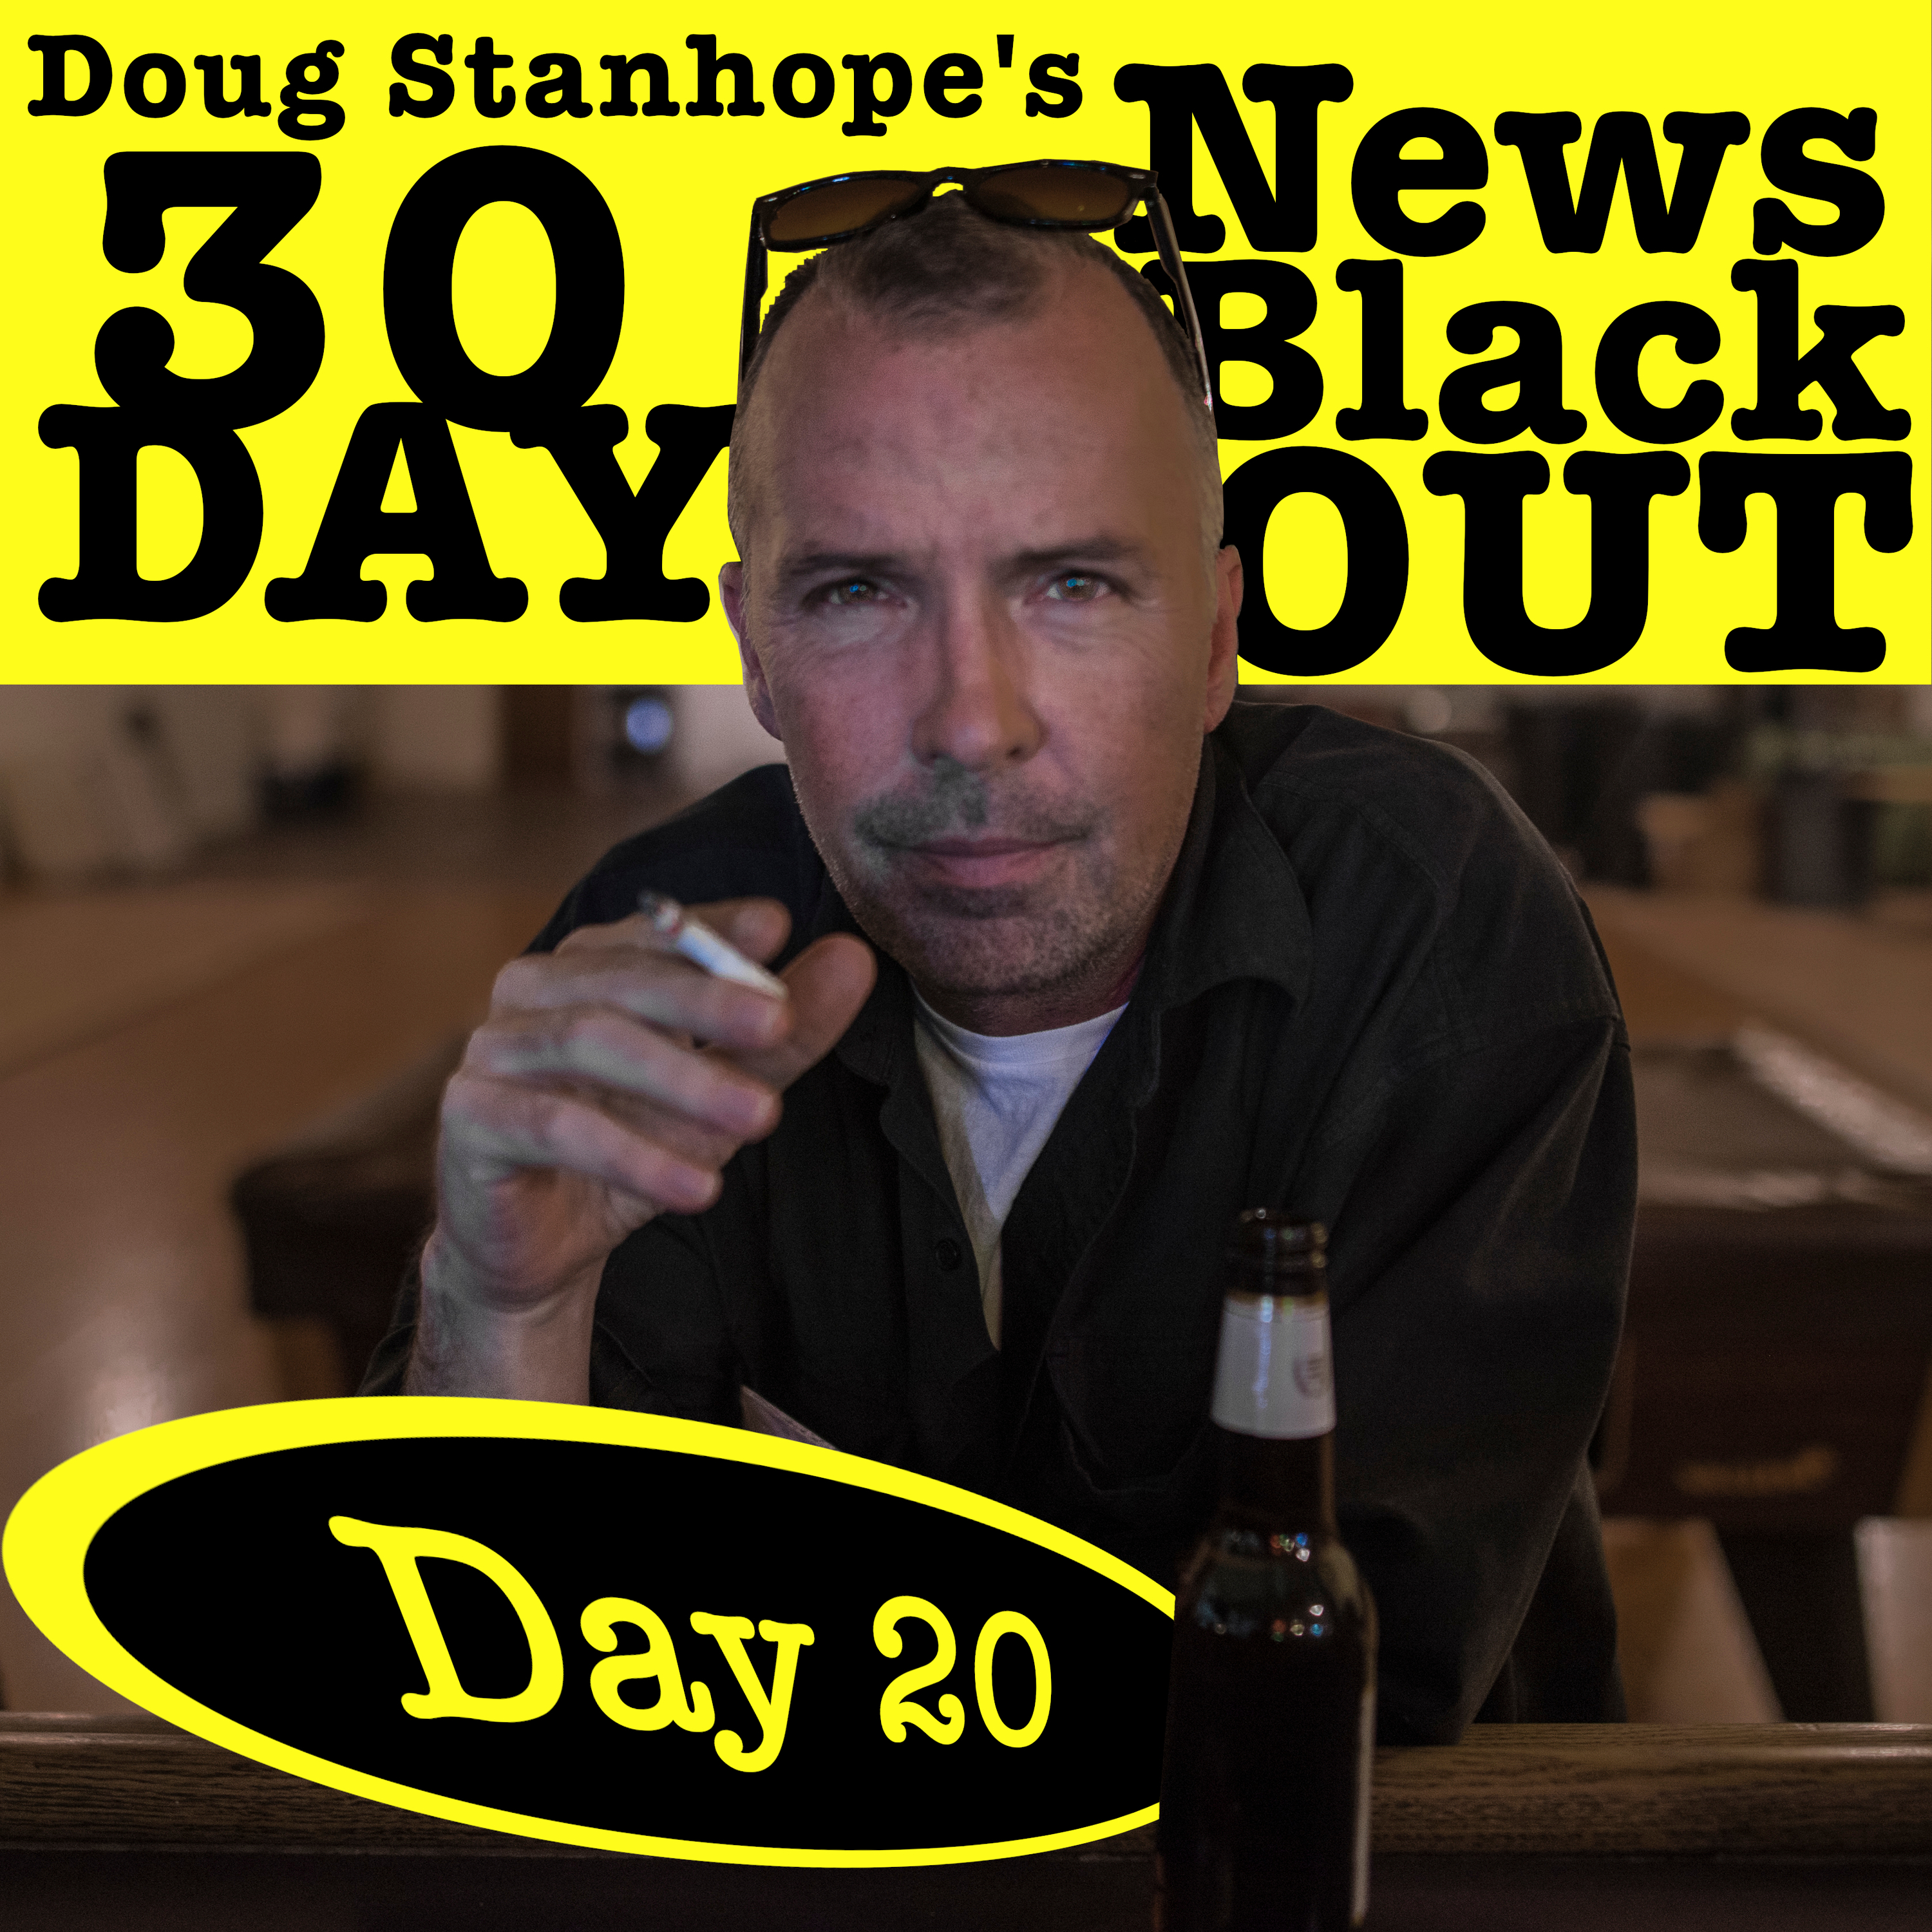 Ep. #384: Mike Kroeger from Nickelback - Doug Stanhope's 30 Day News Blackout (Day 20)